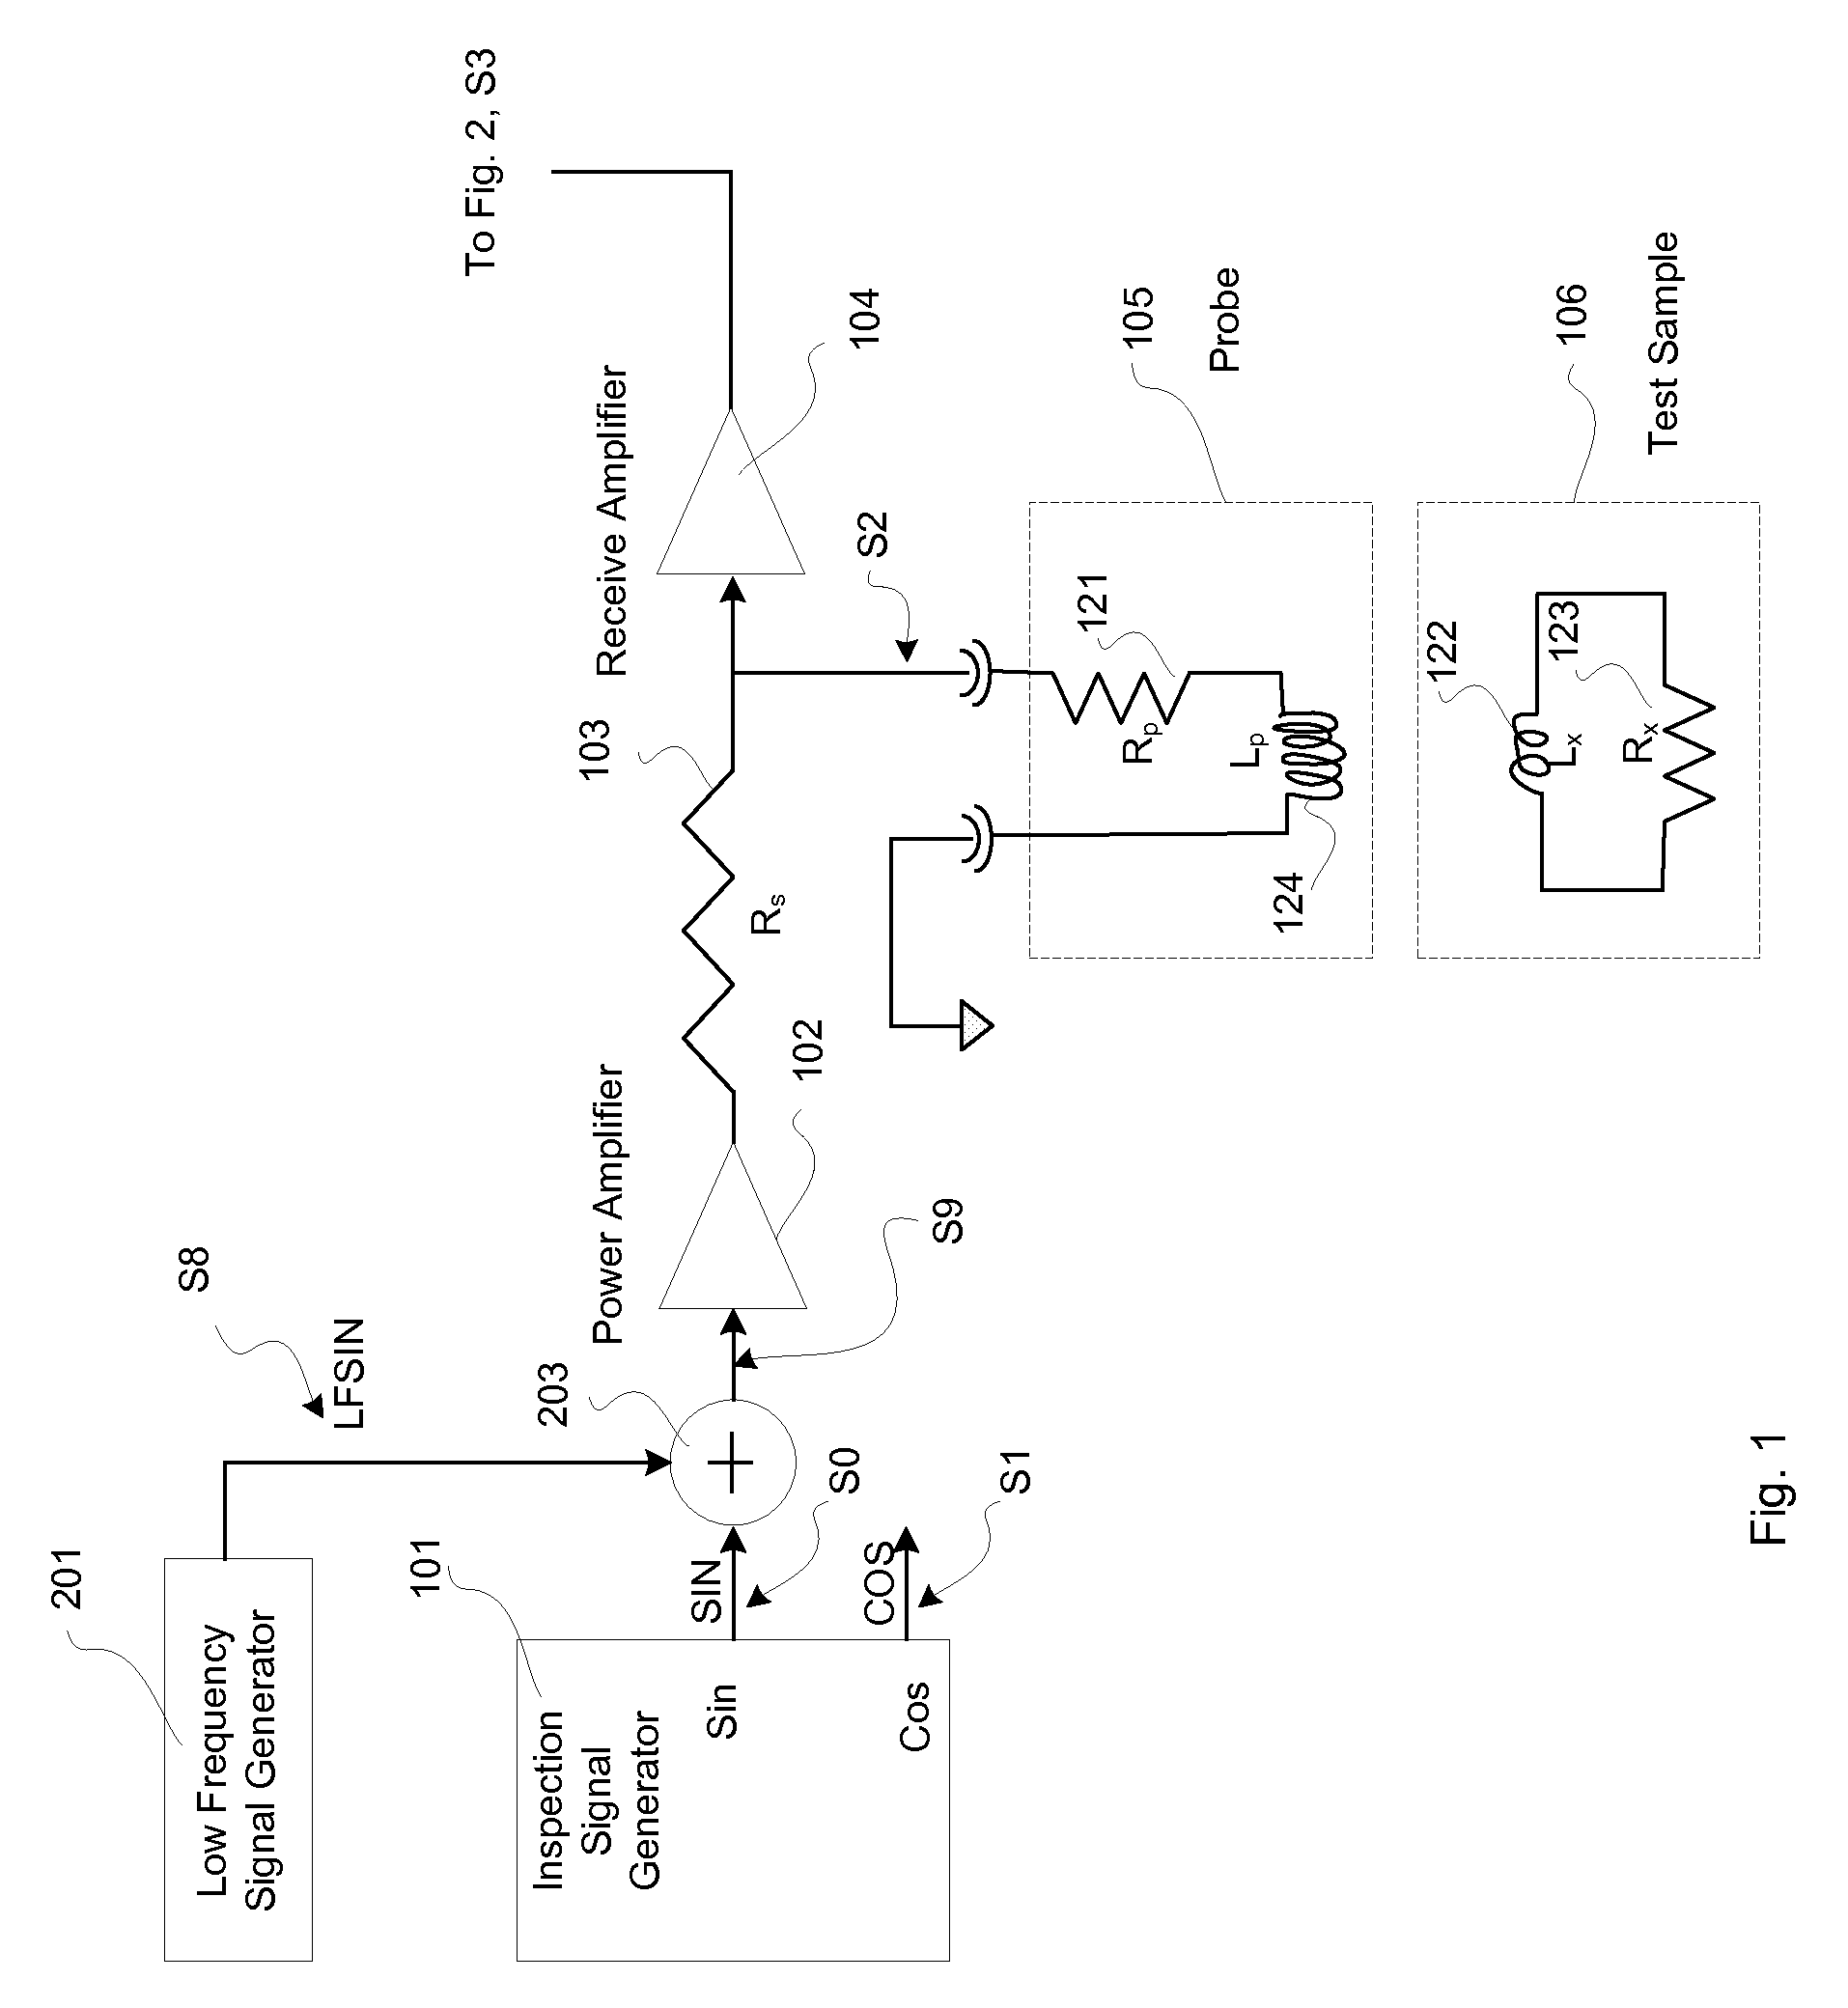 Circuitry for and a method of compensating drift in resistance in eddy current probes